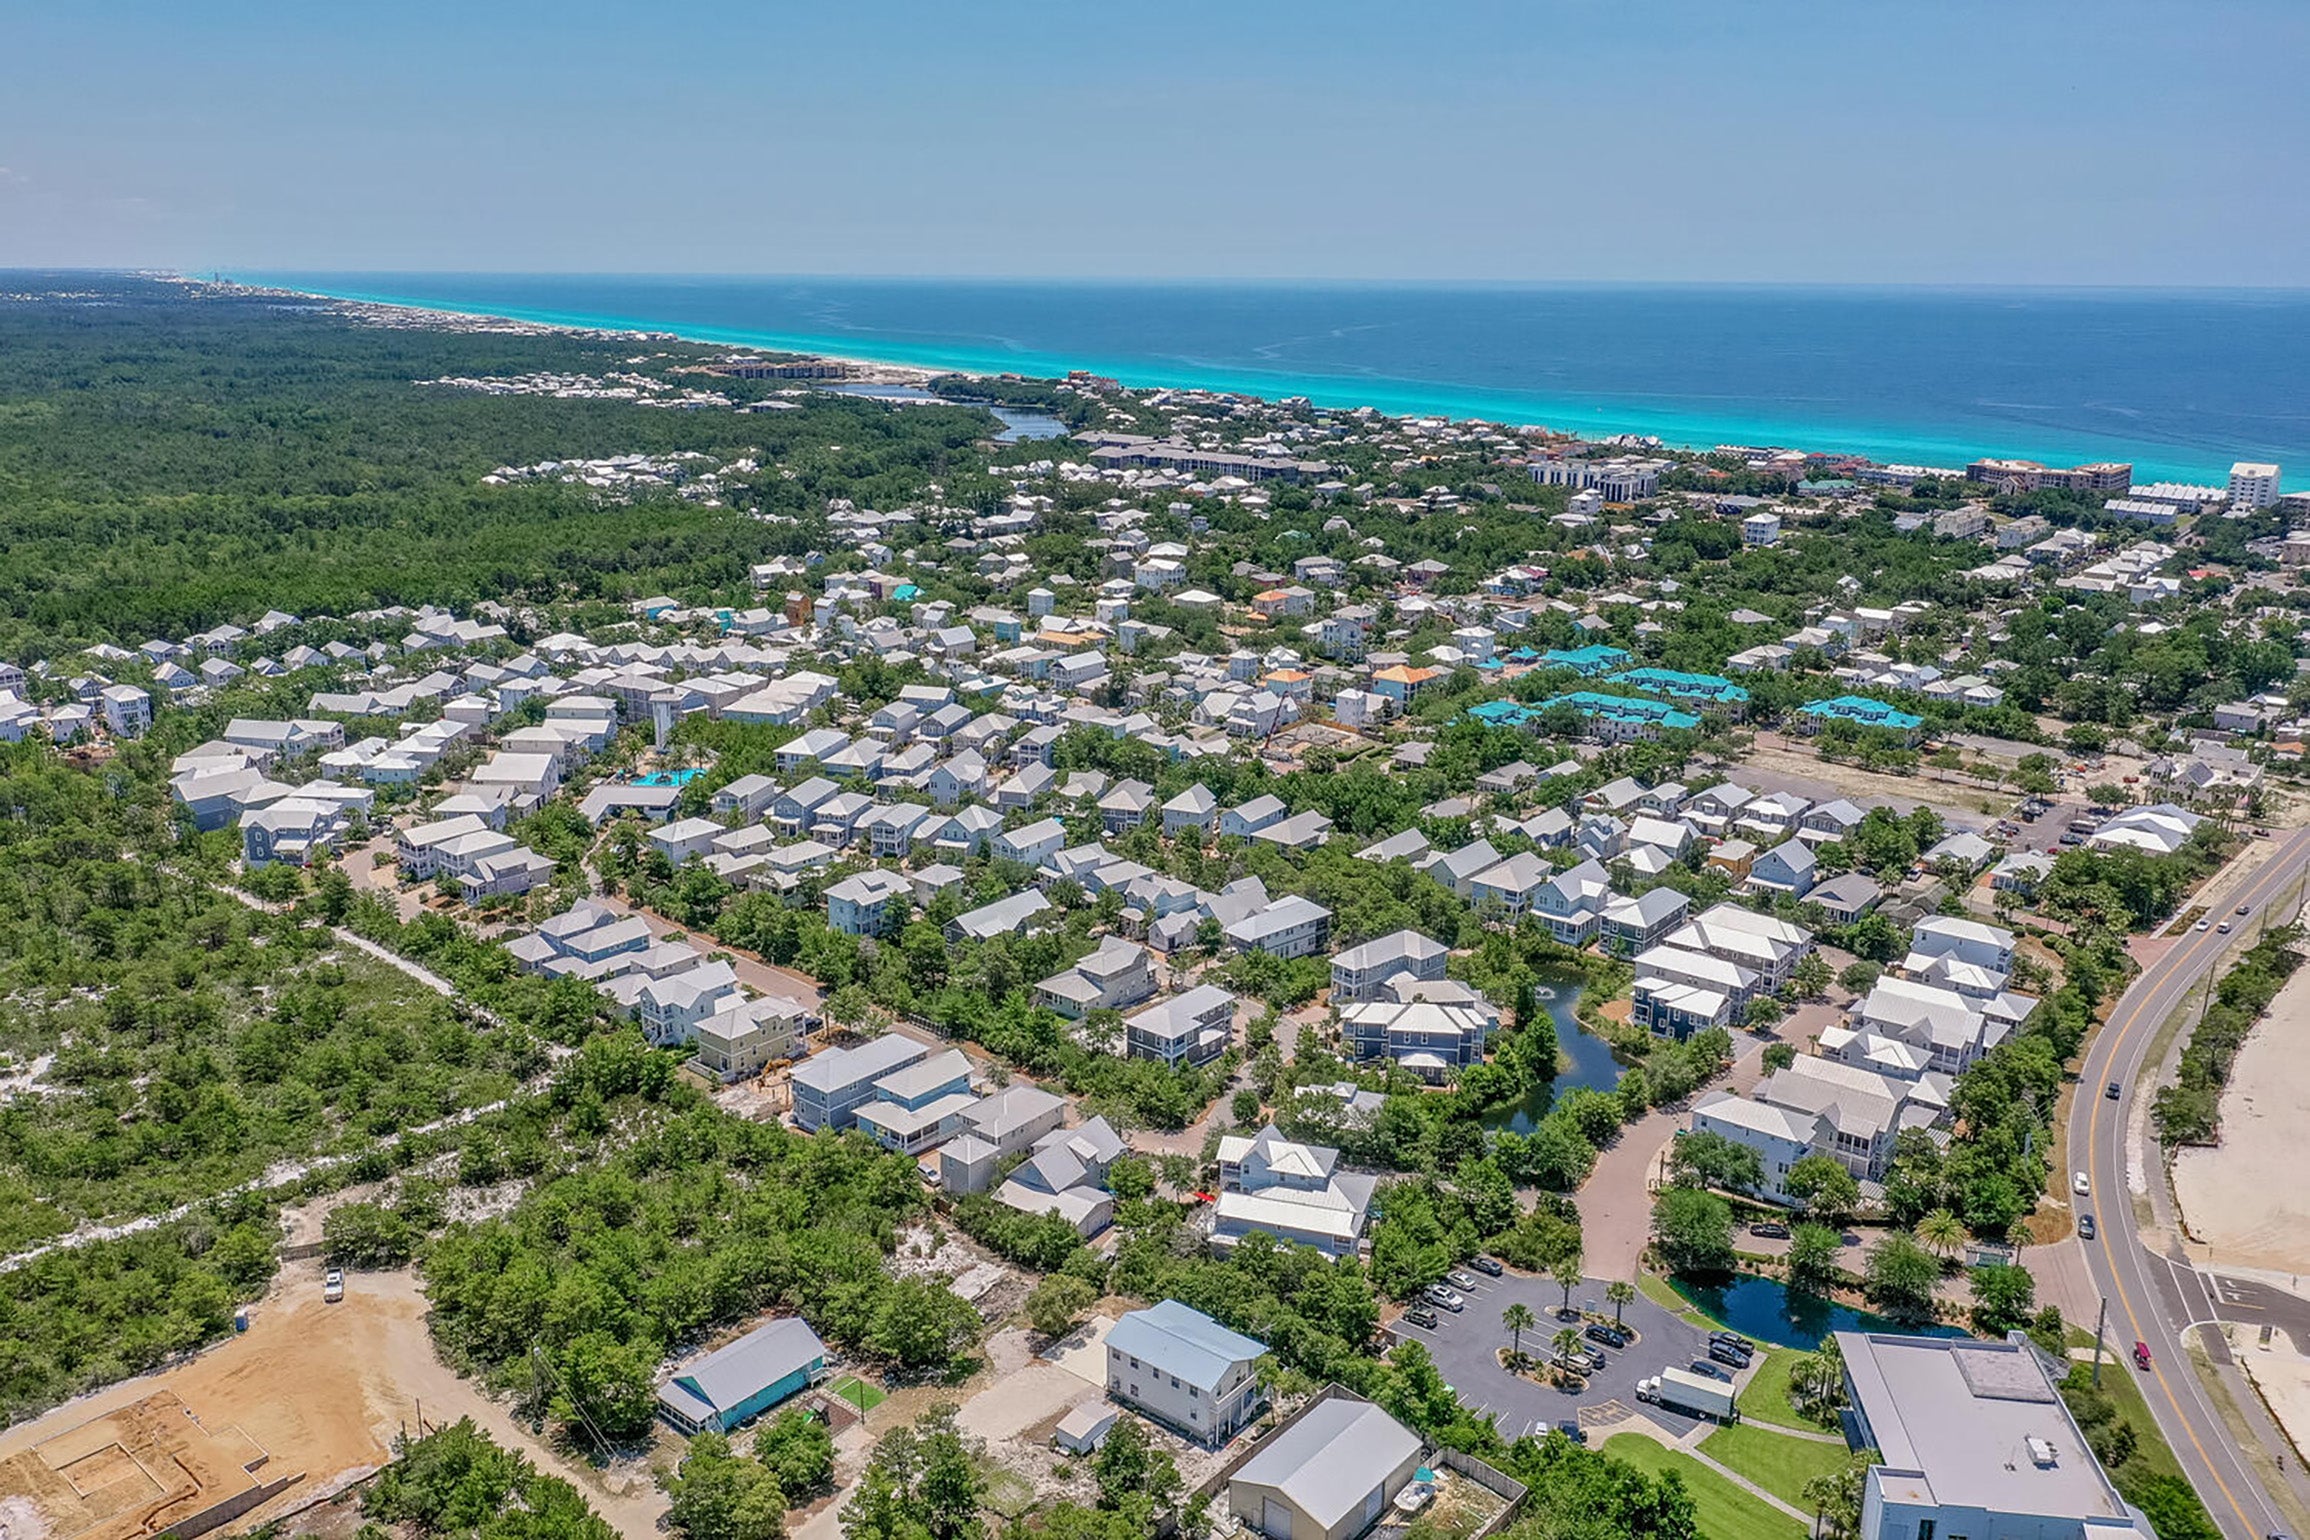 Aerial view of Highland park community distance to beach